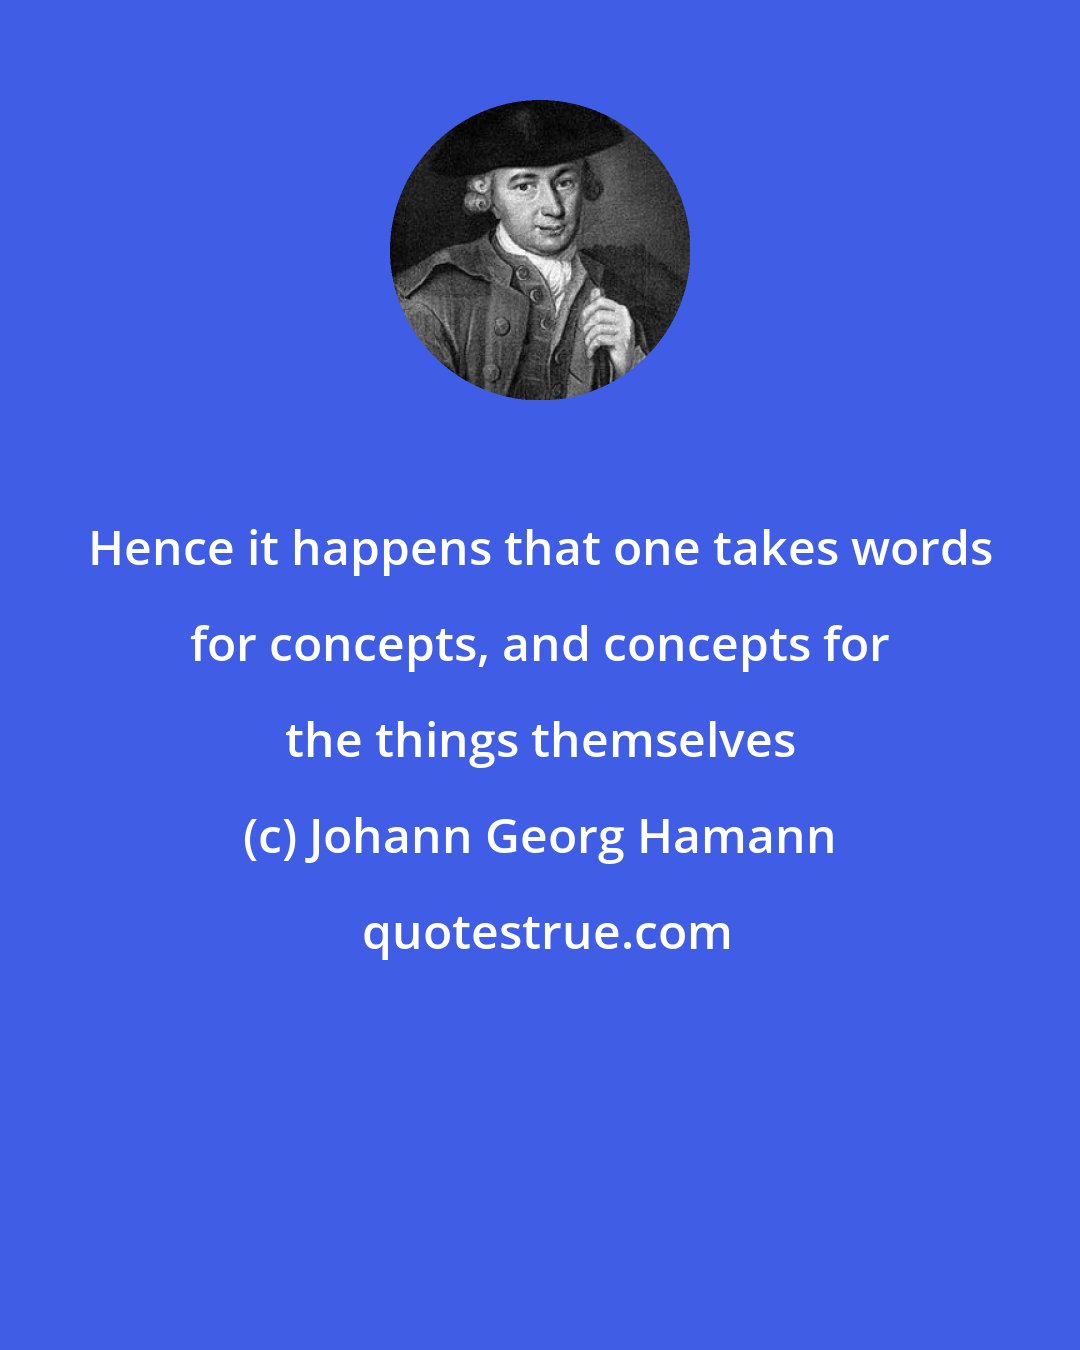 Johann Georg Hamann: Hence it happens that one takes words for concepts, and concepts for the things themselves